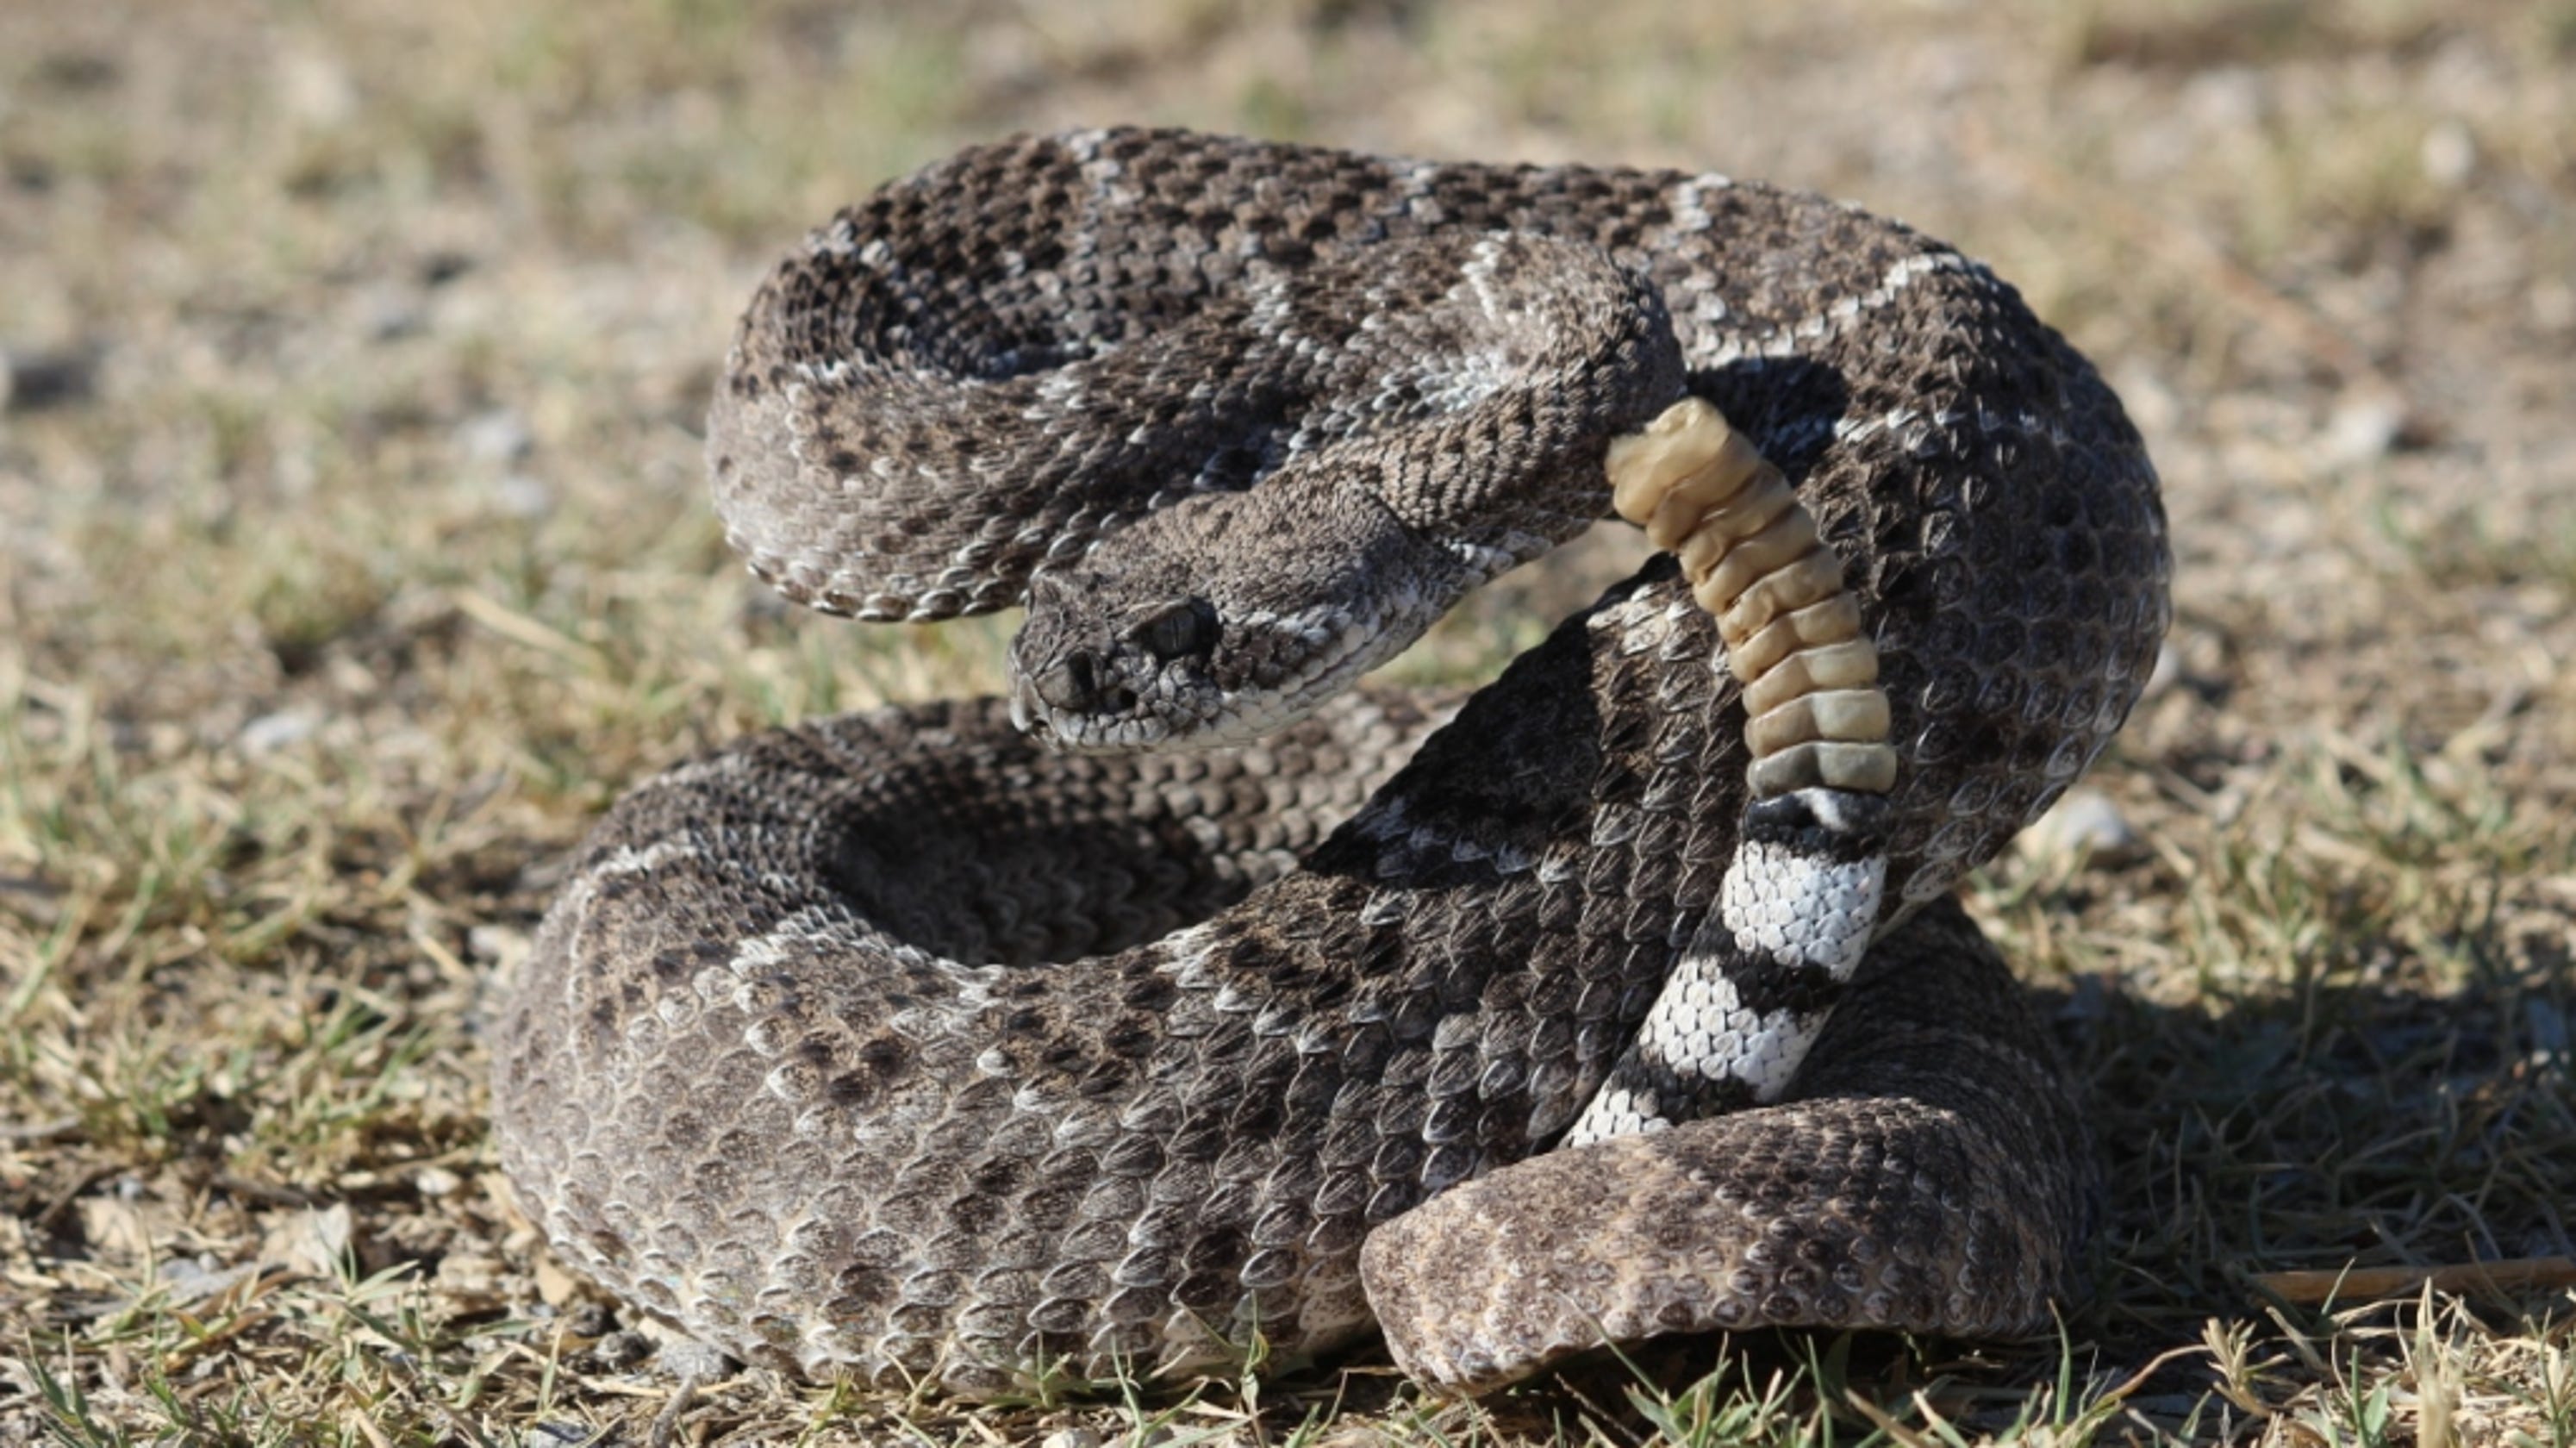 Western diamondback rattlesnakes frequently encountered in Texas